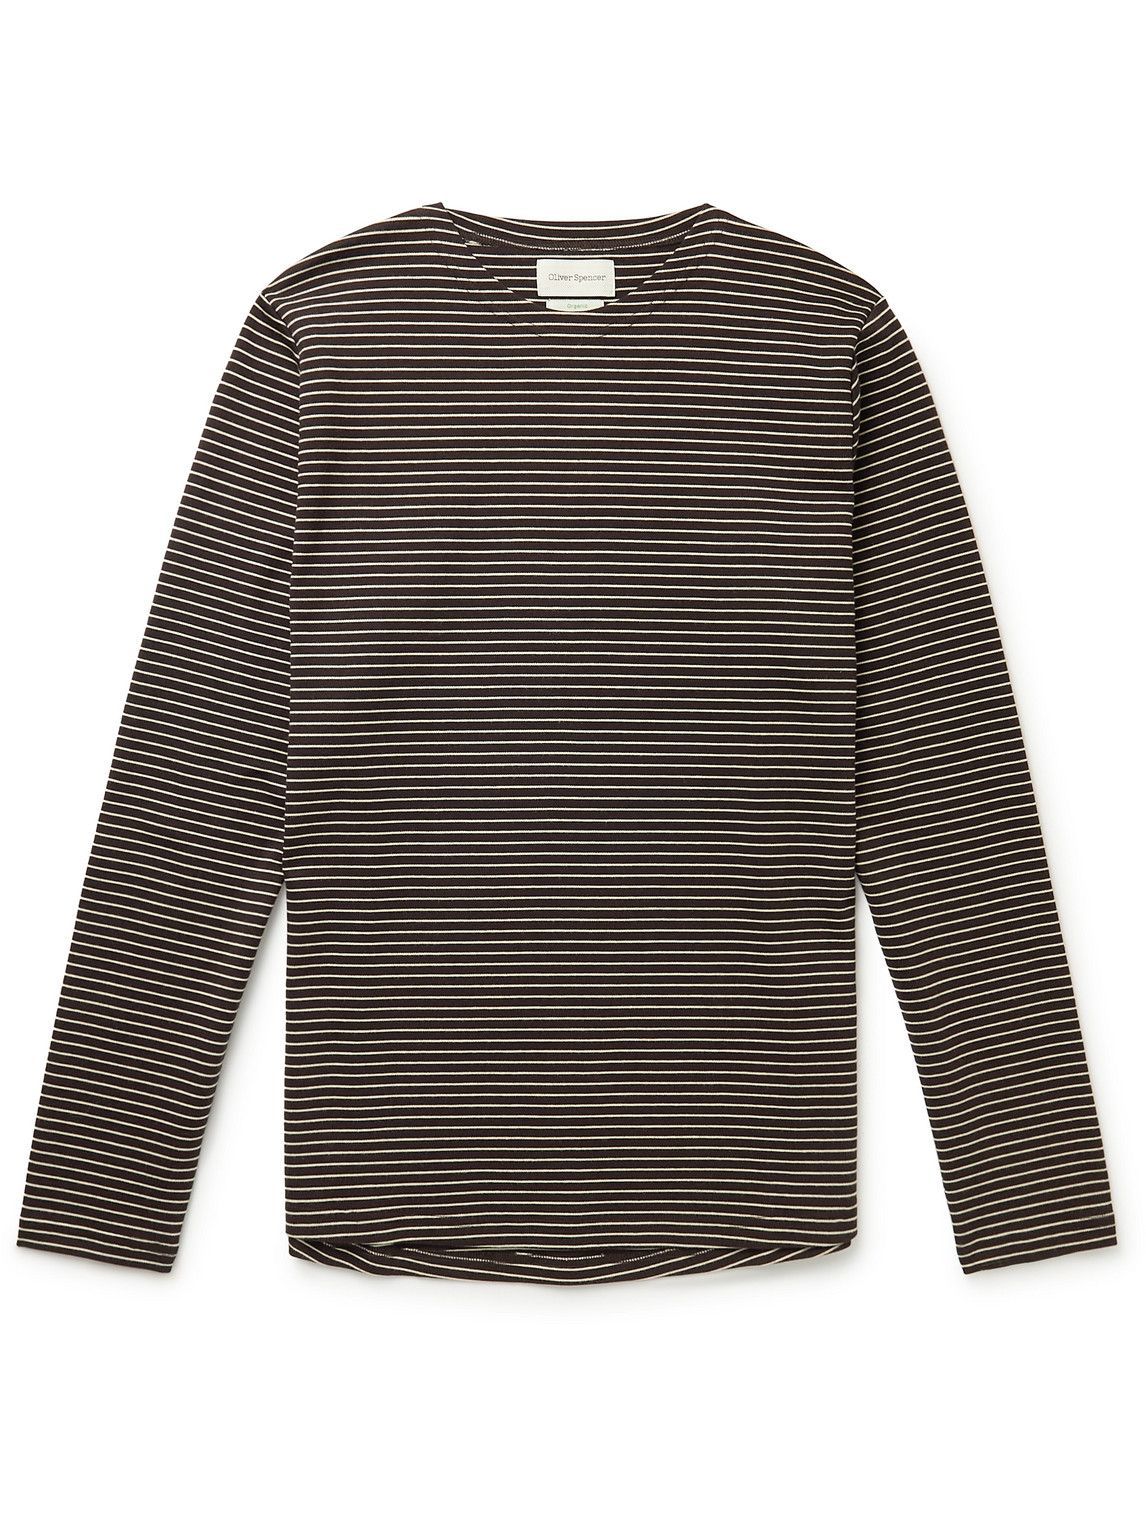 Photo: Oliver Spencer - Newport Striped Organic Cotton-Jersey T-Shirt - Brown